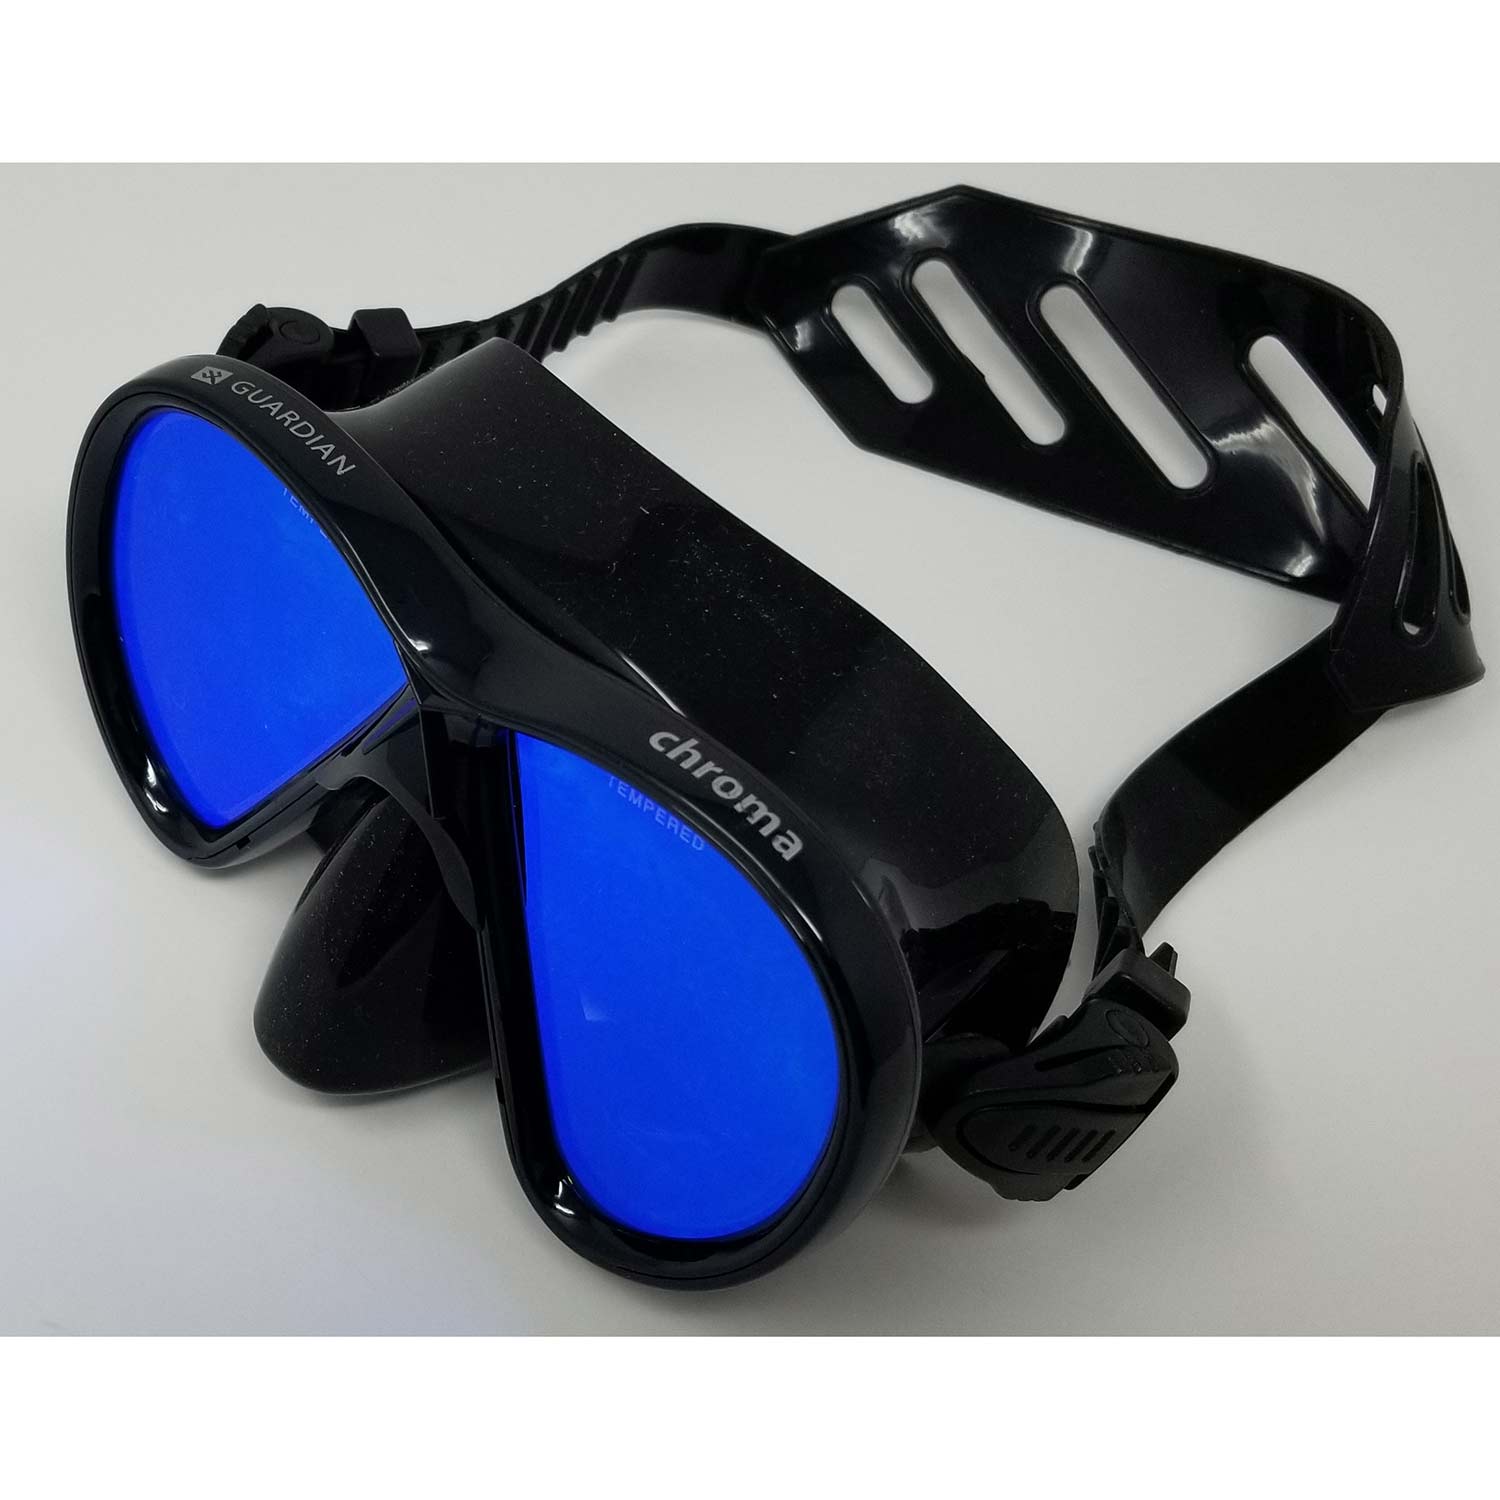 Chroma HD Black/Gold Mirror adult Mask by Guardian Scuba | Paddle & Water Sports at West Marine